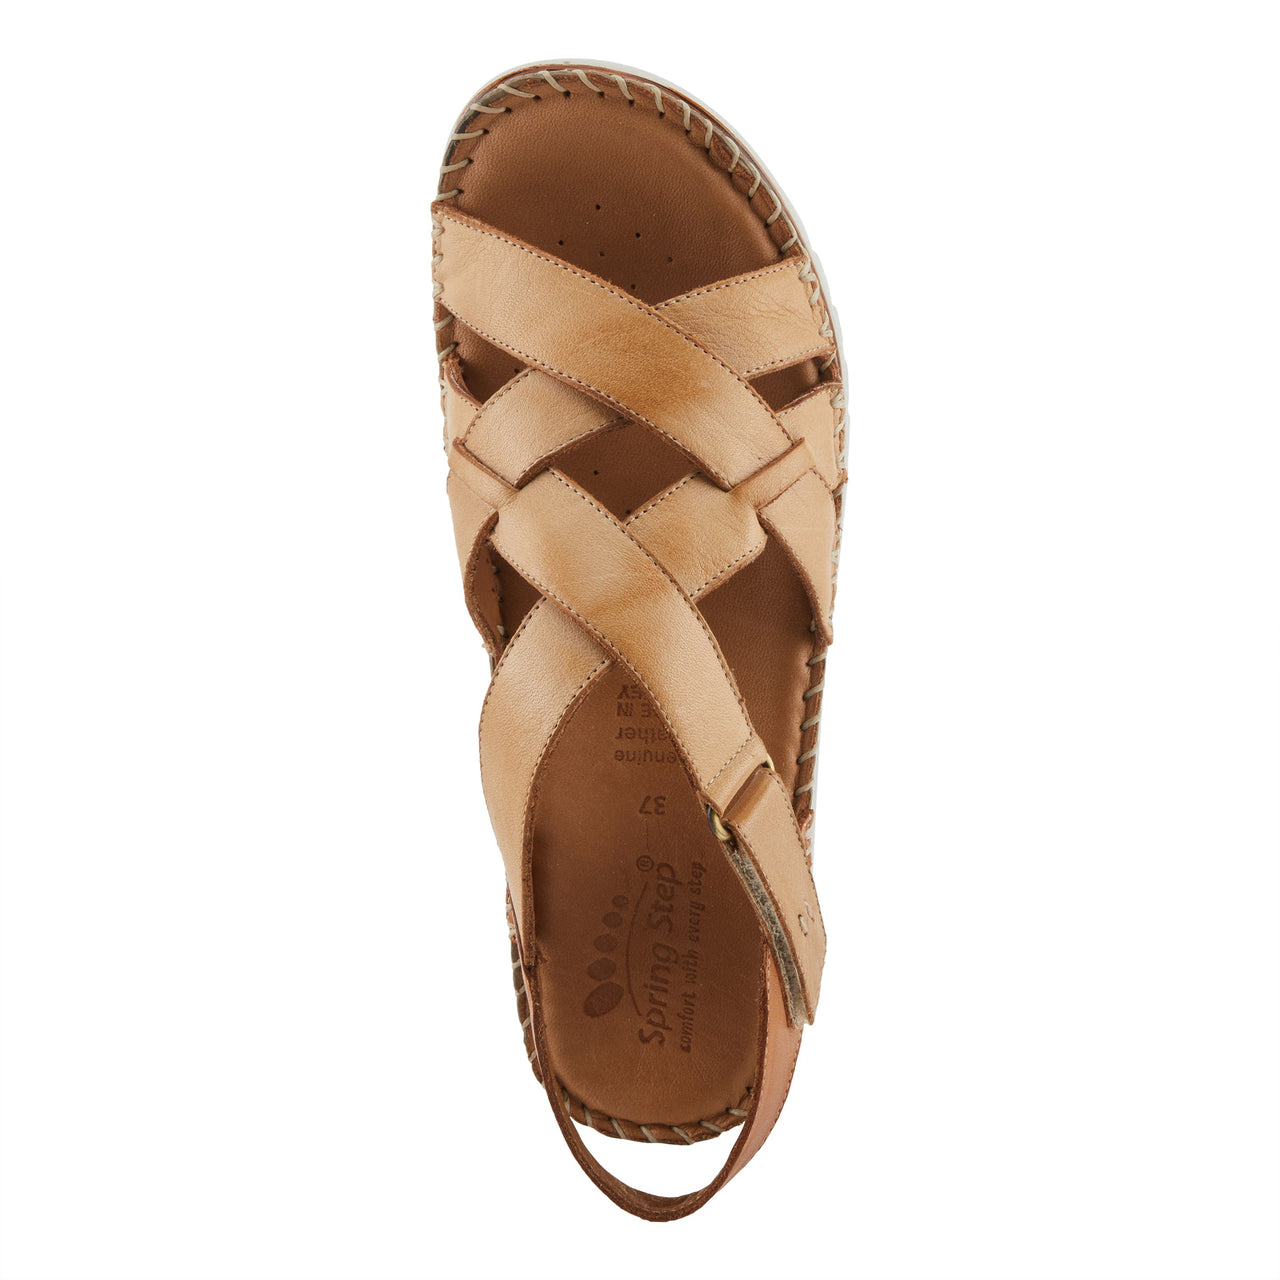 Comfortable Spring Step Migula Sandals with stylish toe loop and flexible sole